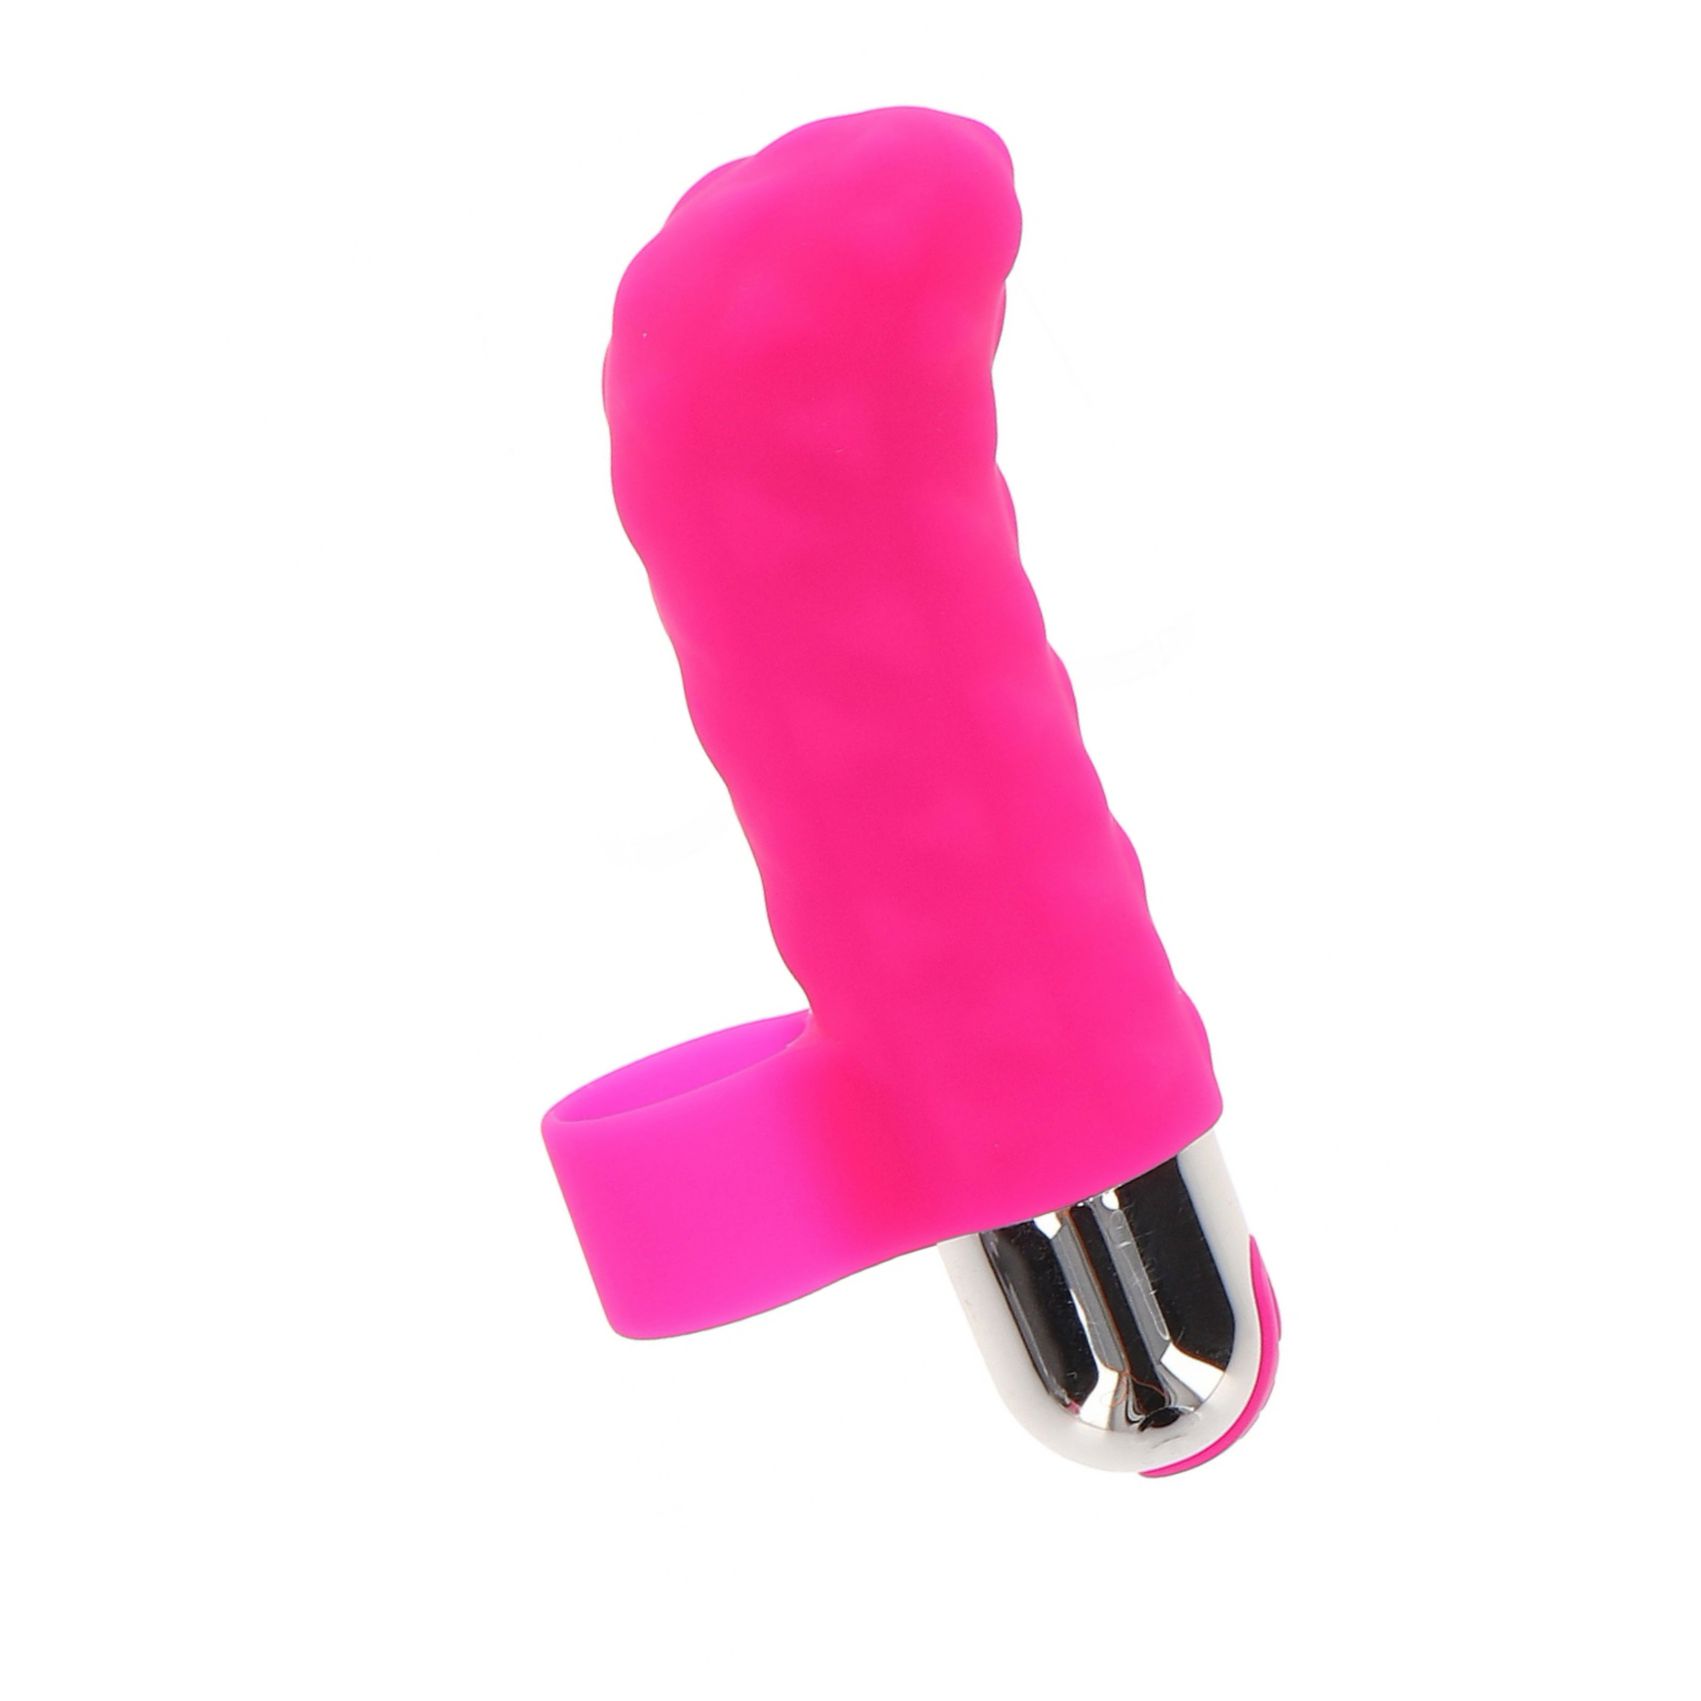 Vibrator Tickle Pleaser Rechargeable Roz